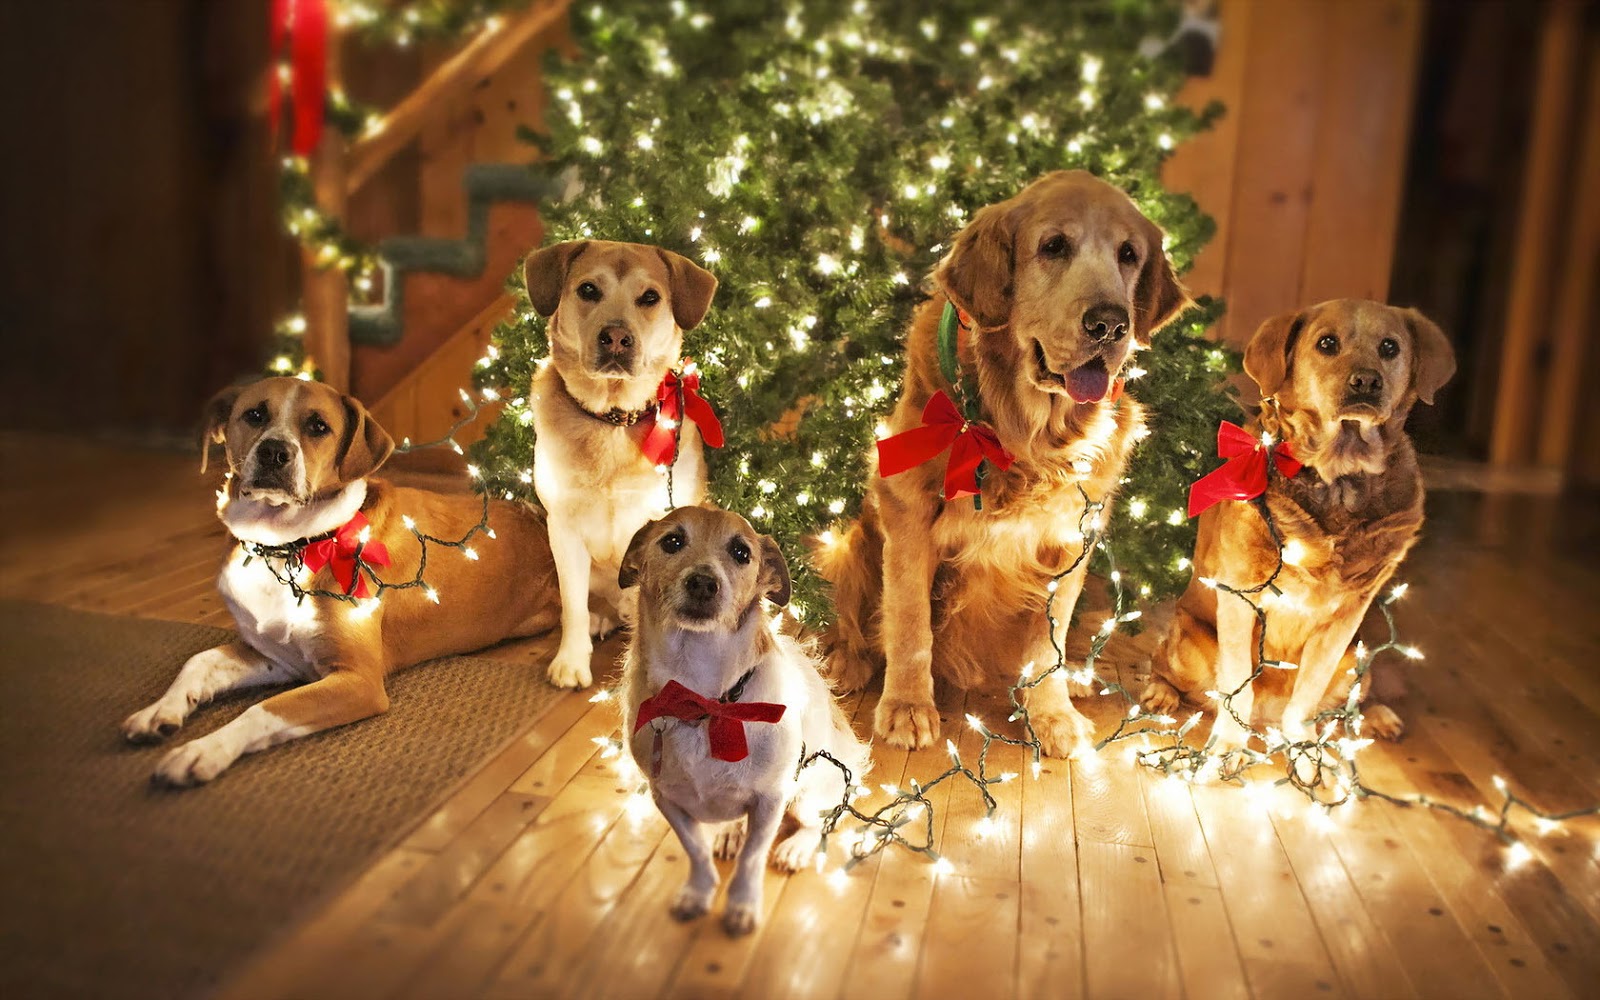 Top christmas animal wallpaper free Download Book Source for free download HD, 4K & high quality wallpaper